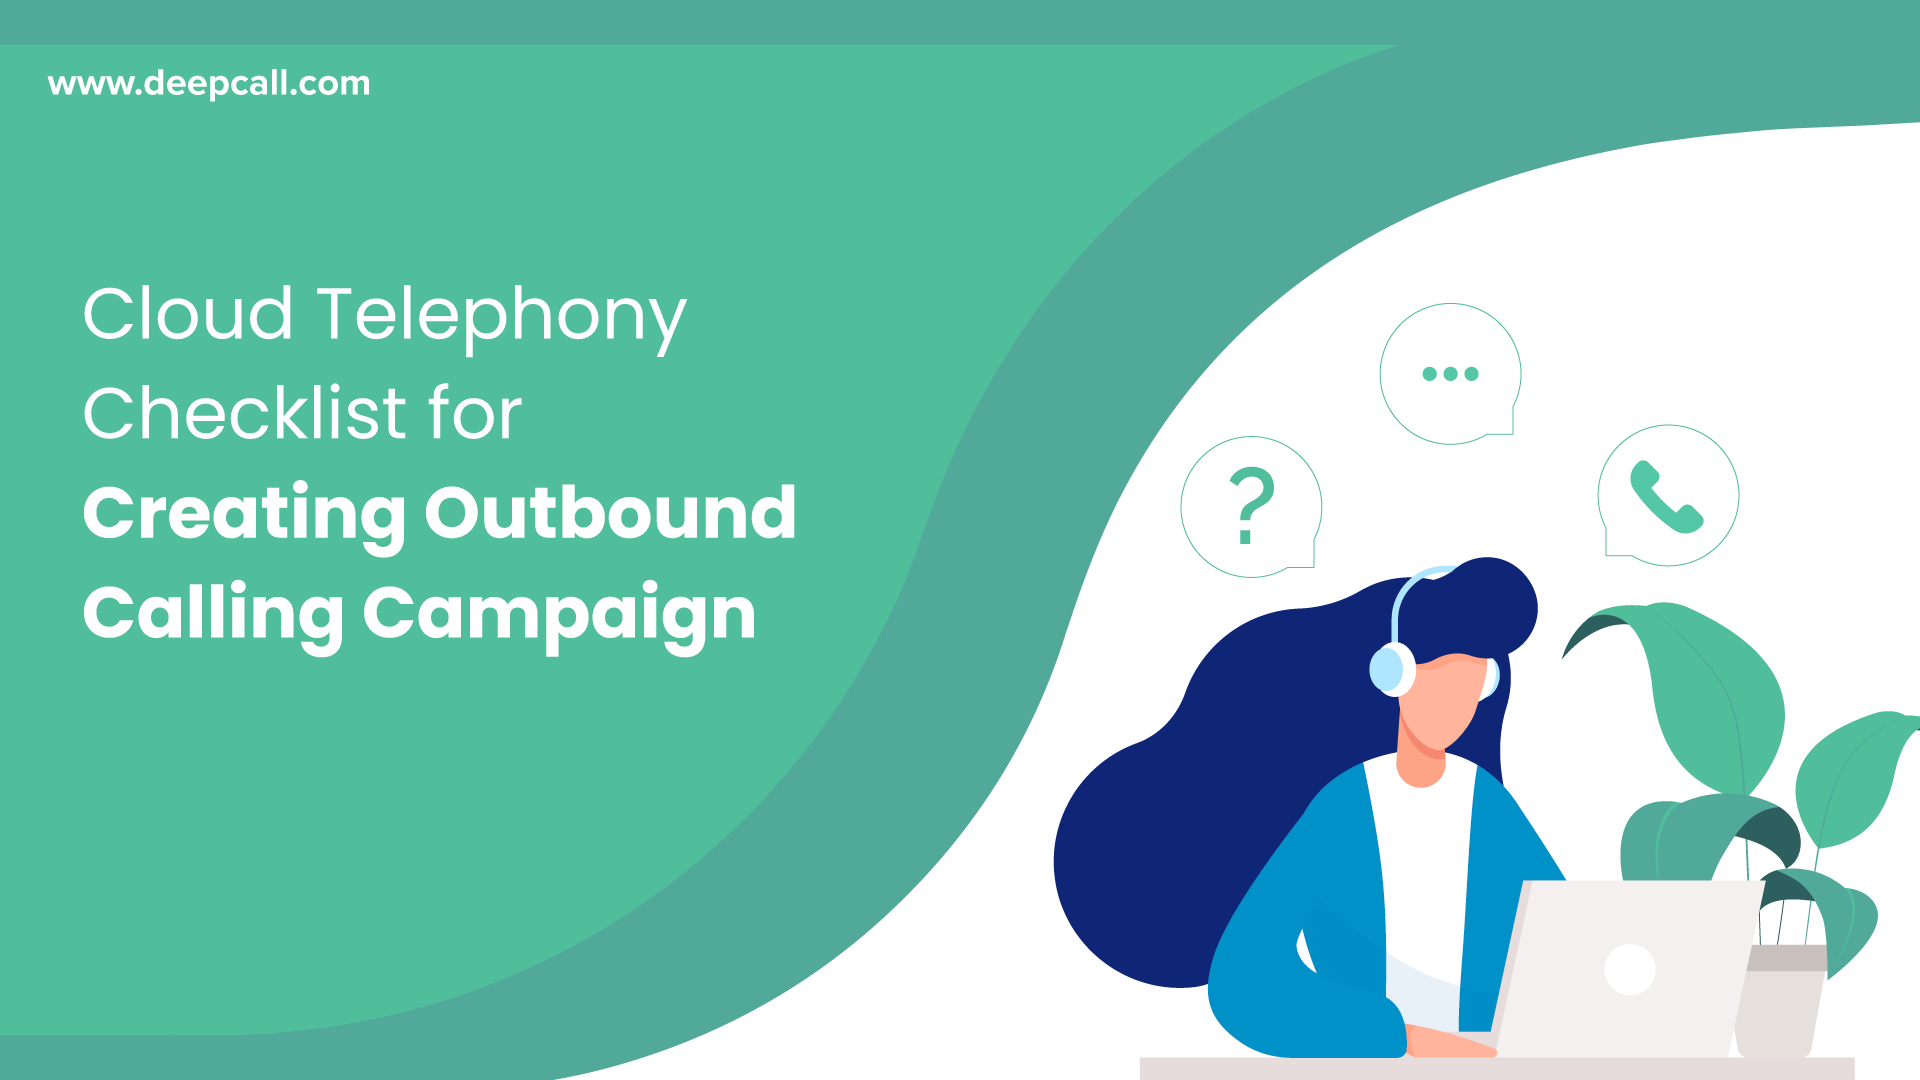 Cloud Telephony Checklist for Creating Outbound Calling Campaign